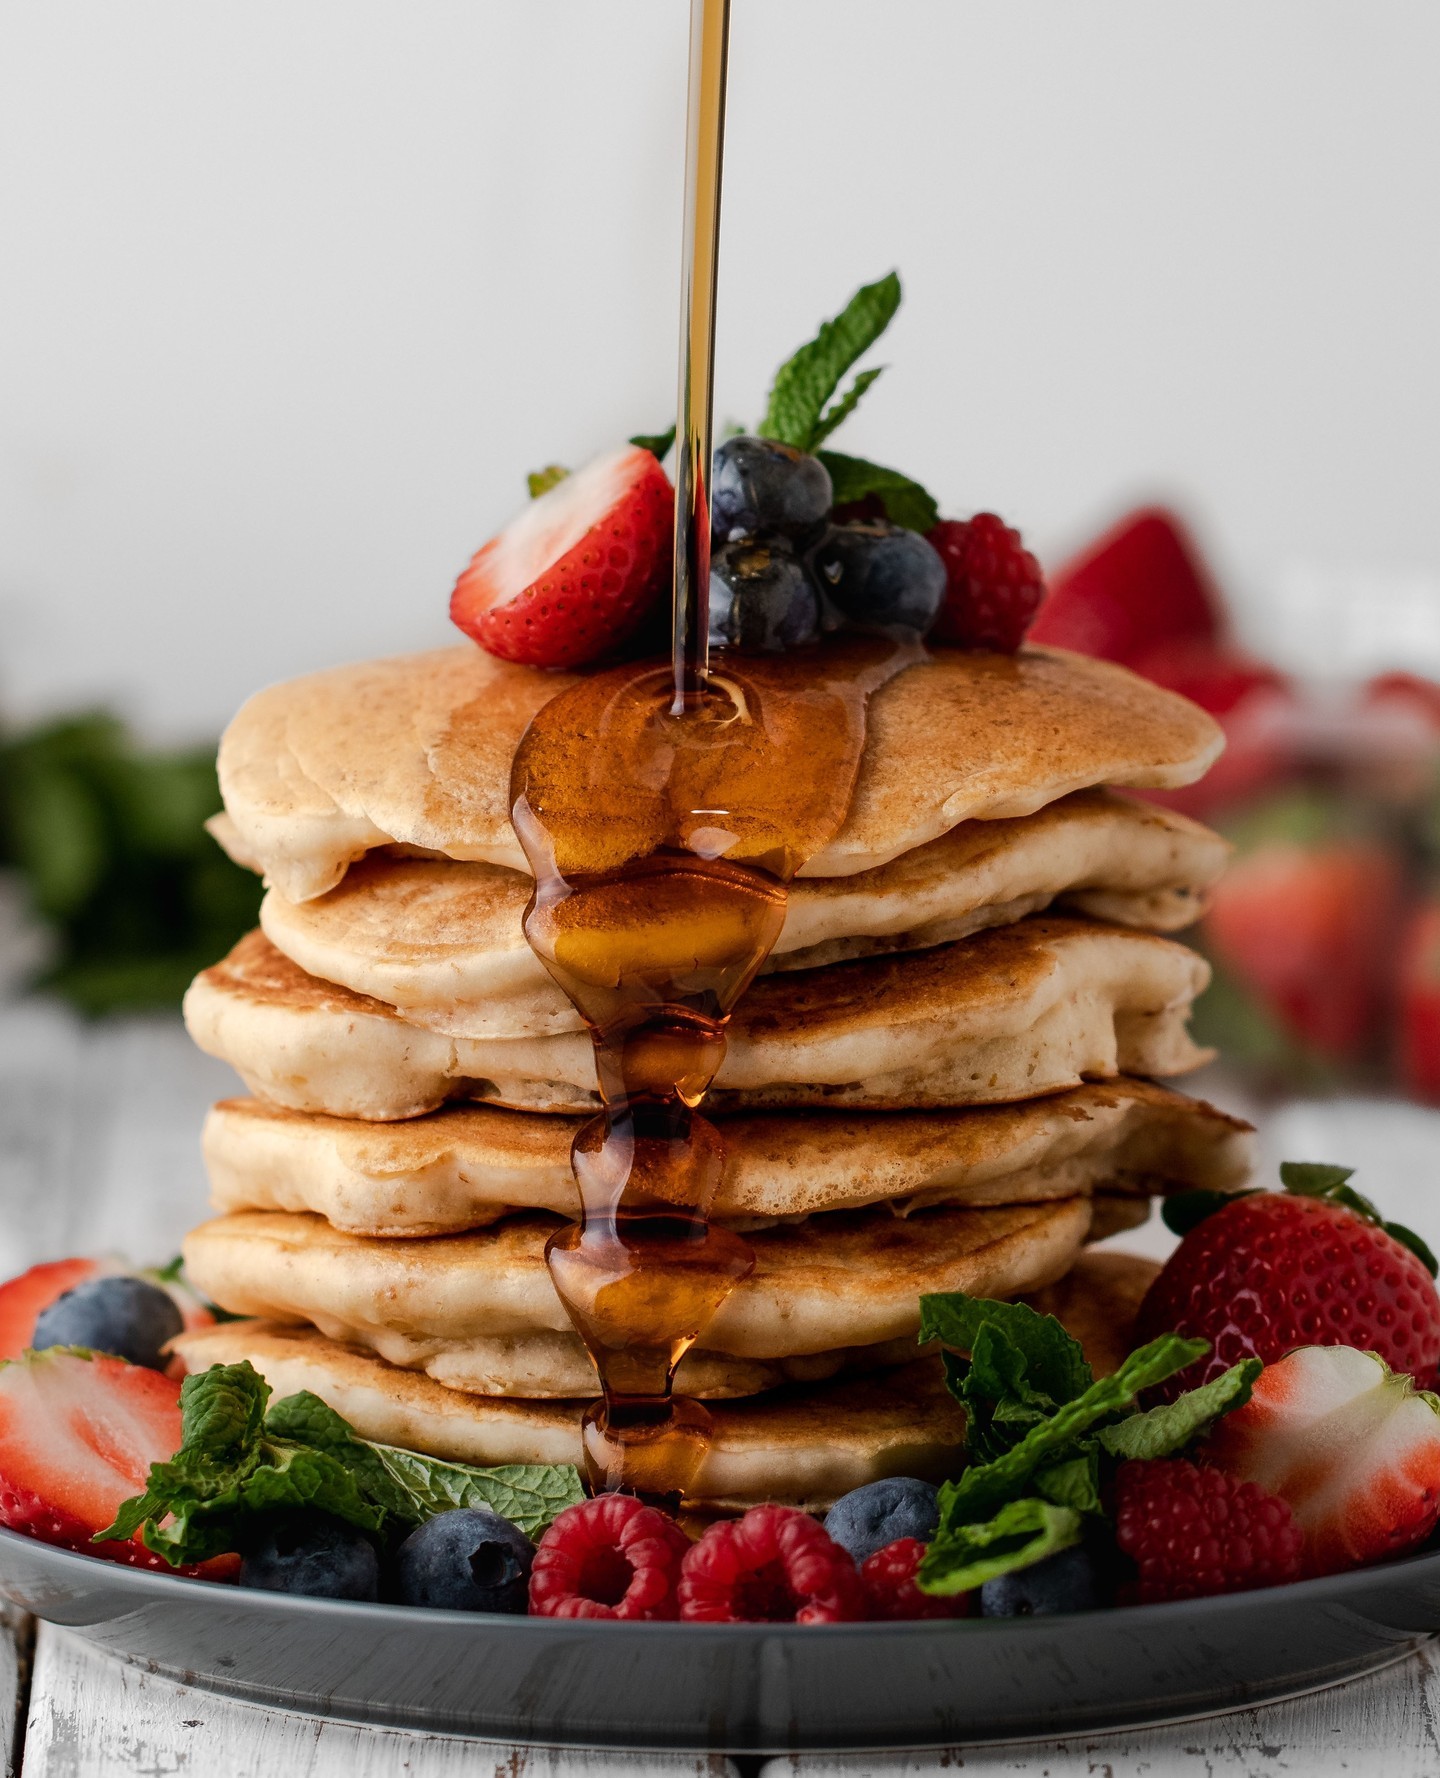 I'll take one big stack of pancakes please 😋

There is a running debate about which is better; pancakes or waffles? We'll be honest, we're waffle people. But if there's a pancake recipe that could change our mind it's our Vegan Buttermilk Pancakes! 

🥞 Piled high, topped with fresh berries, and drizzled with maple syrup – is there anything better?

Get the full recipe at LINK IN BIO 👆 or at www.twomarketgirls.com